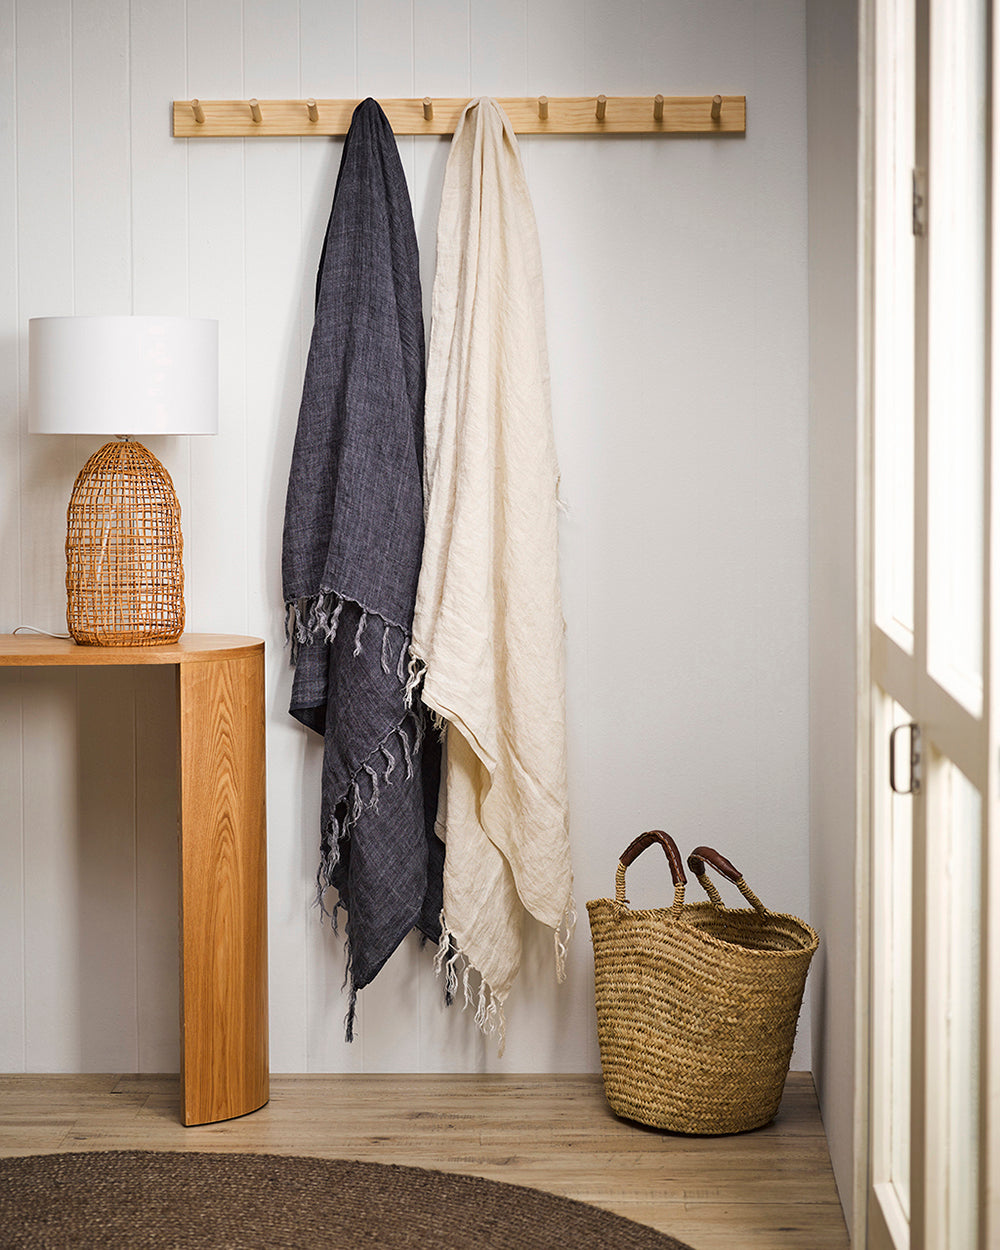 Indira linen throws in almond and french navy hanging from wooden pegs